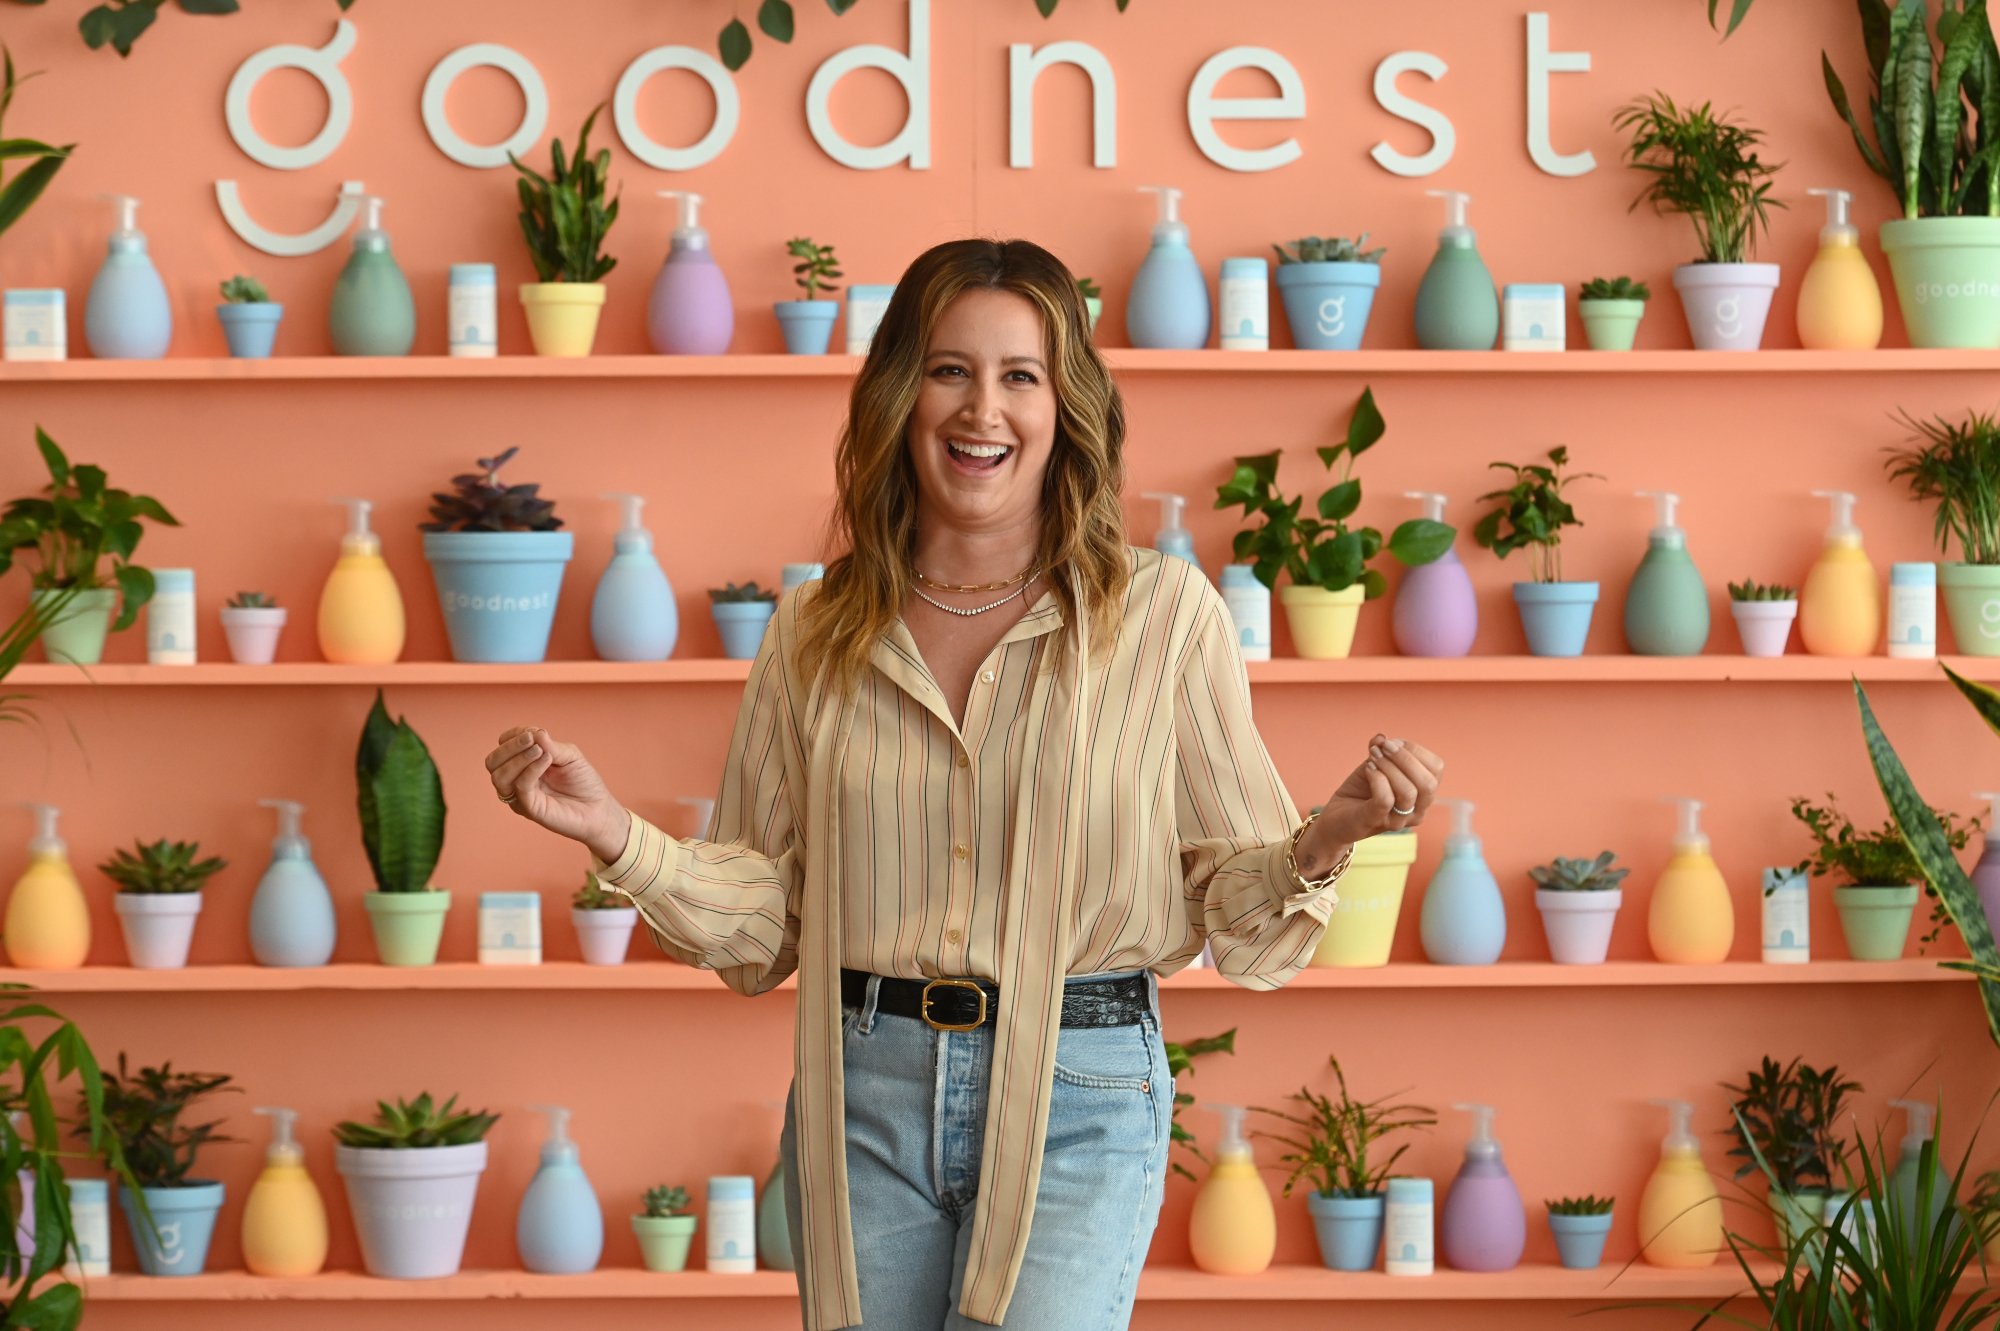 Ashley Tisdale, who did a tour of her Los Angeles home, smiling and standing in front of the Goodnest logo